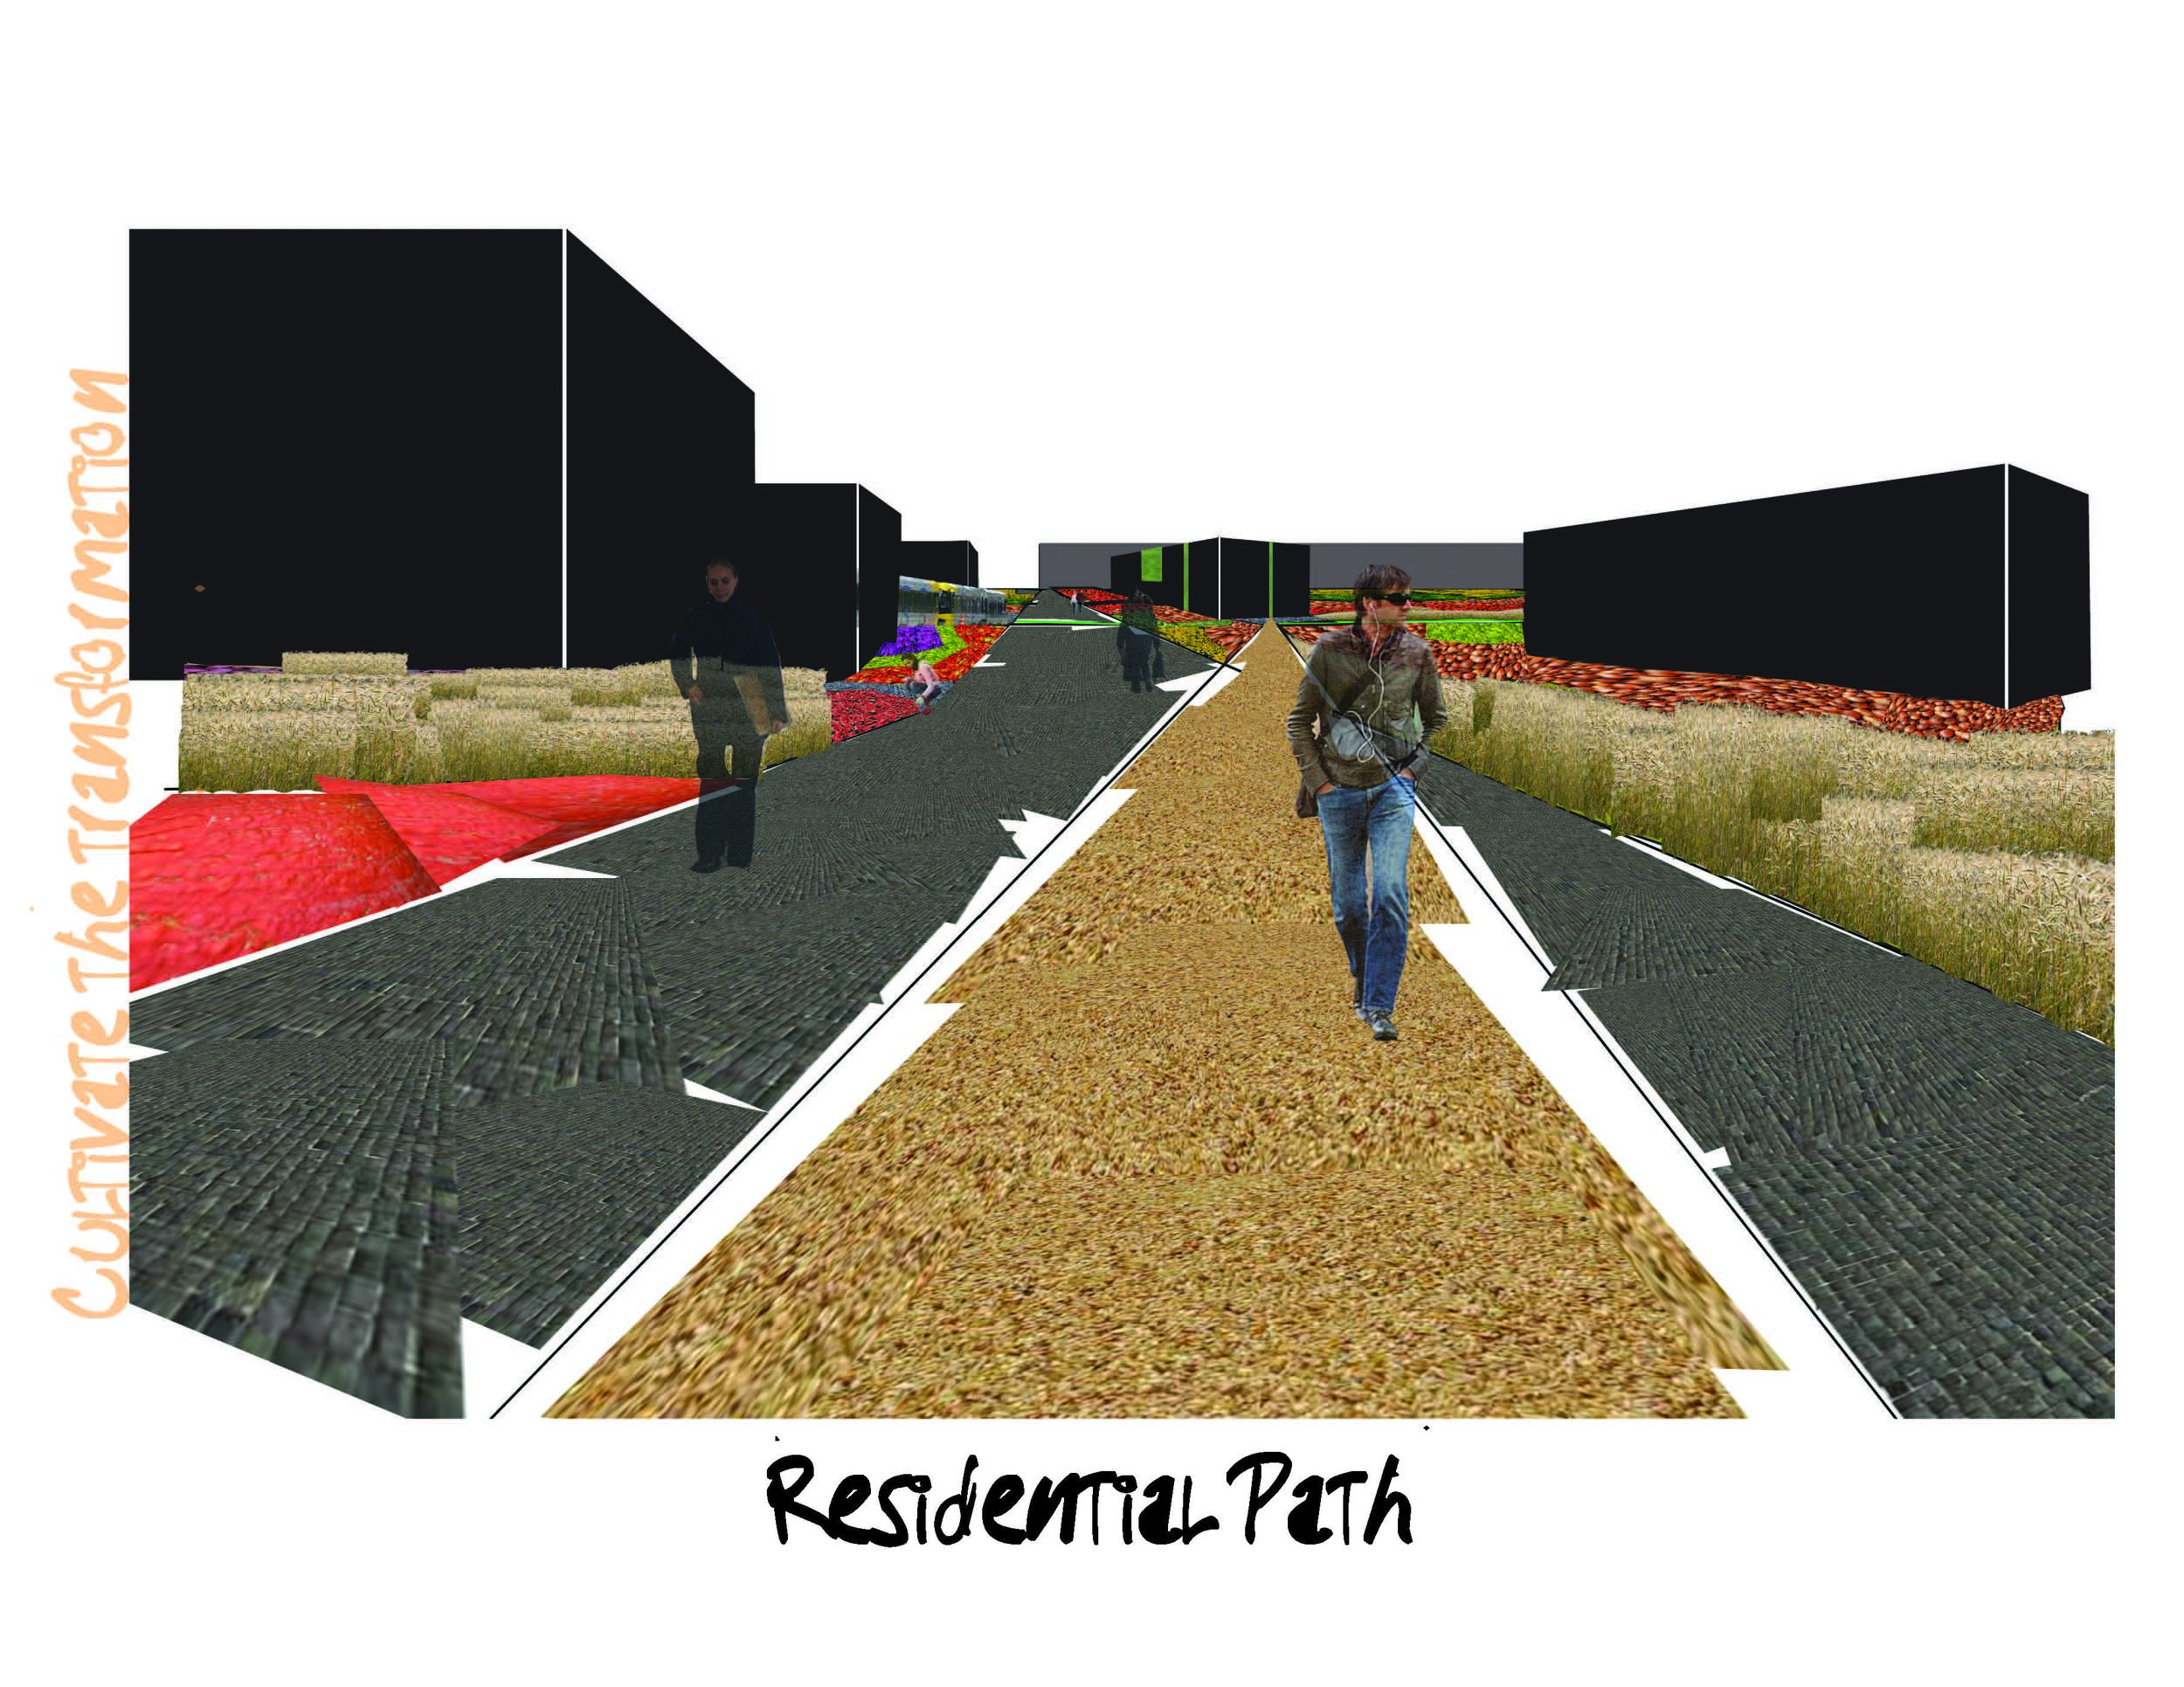 residential path perspective.jpg